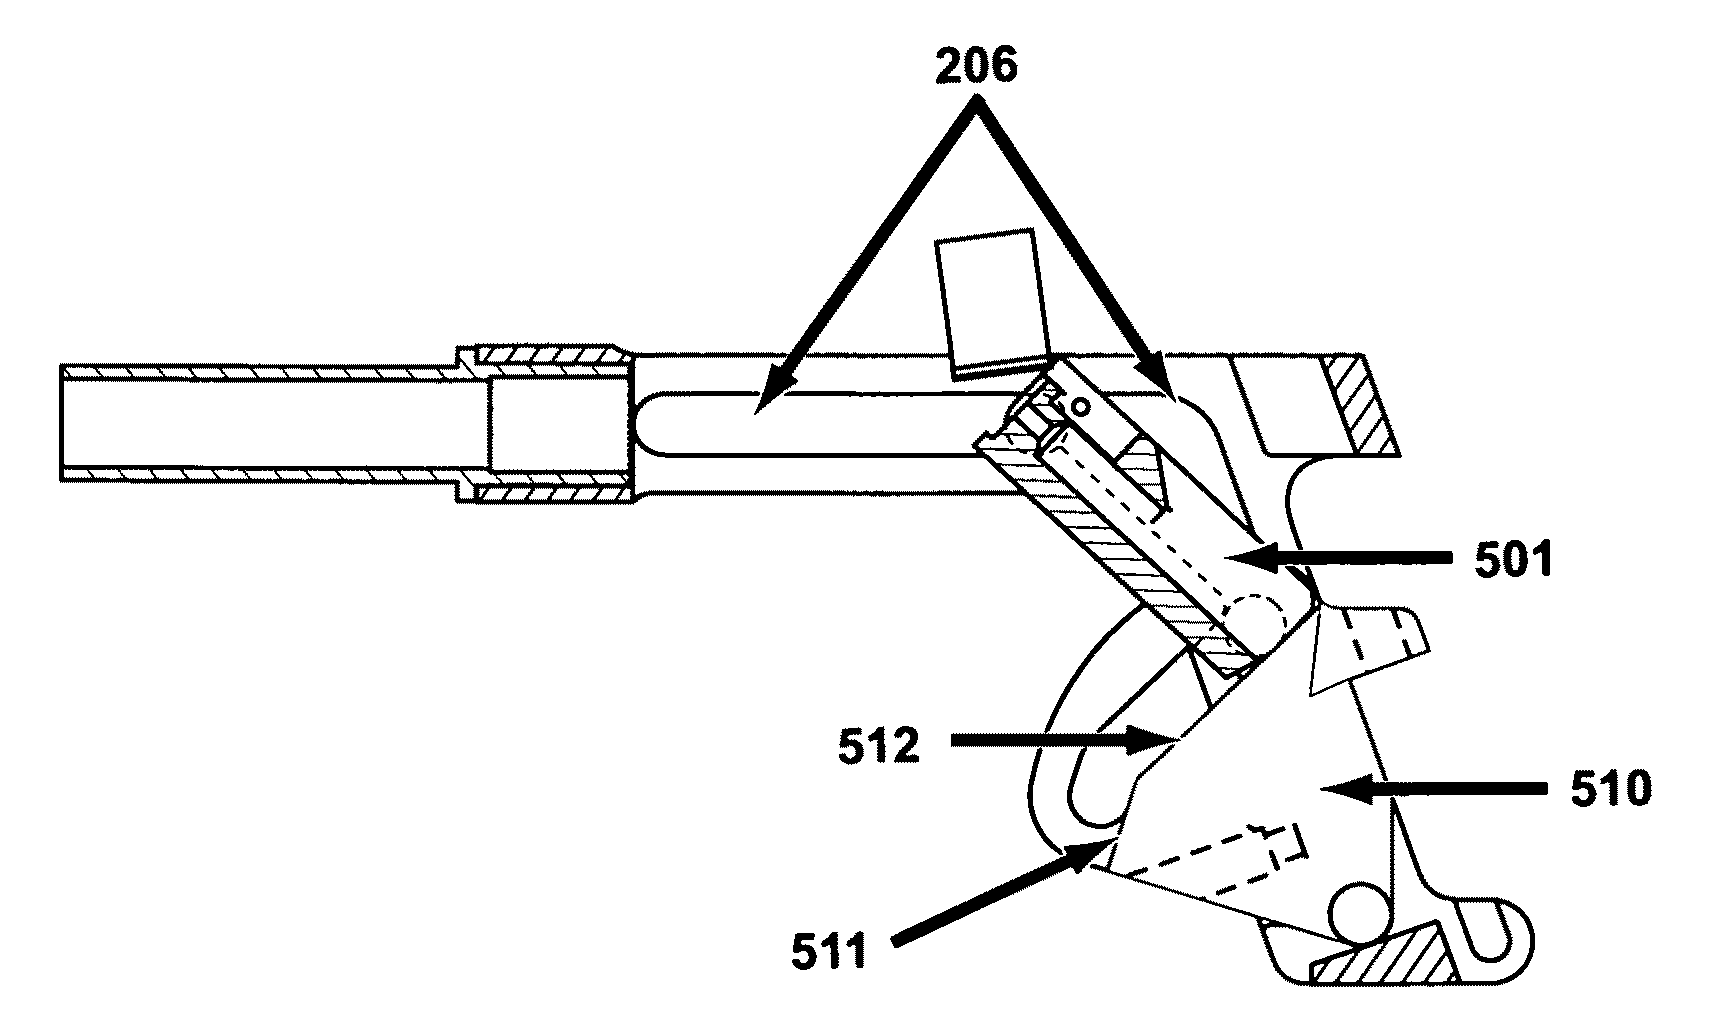 Firearm with enhanced recoil and control characteristics